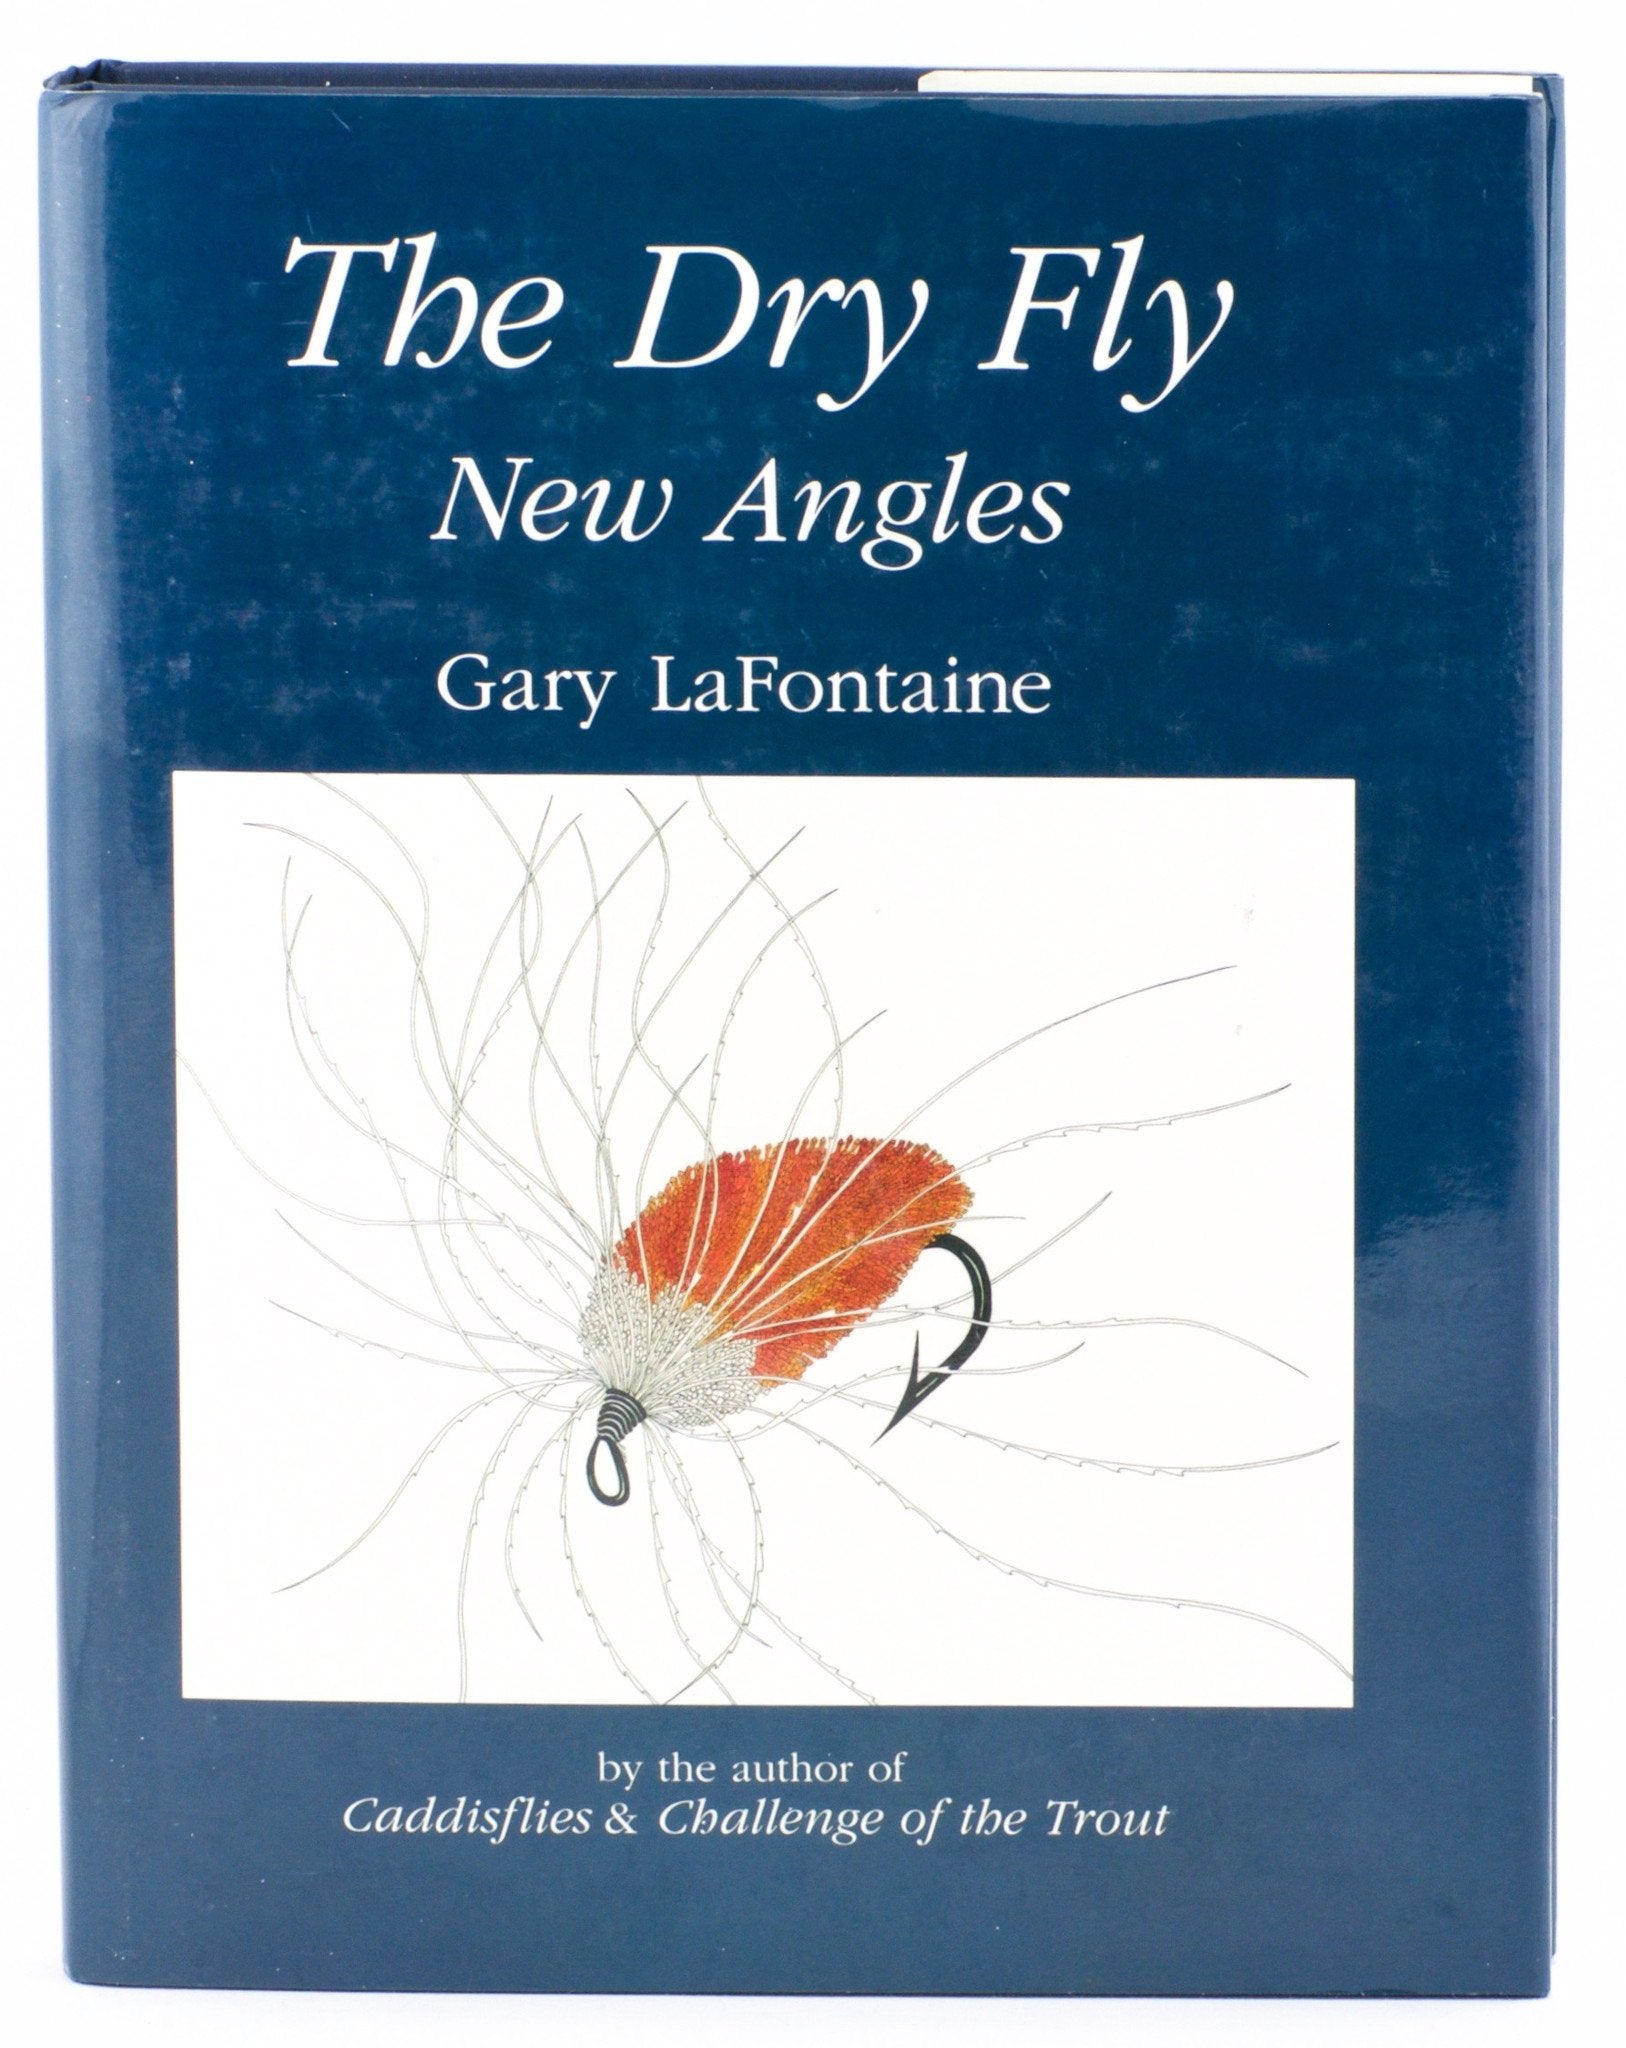 LaFontaine, Gary - The Dry Fly: New Angles